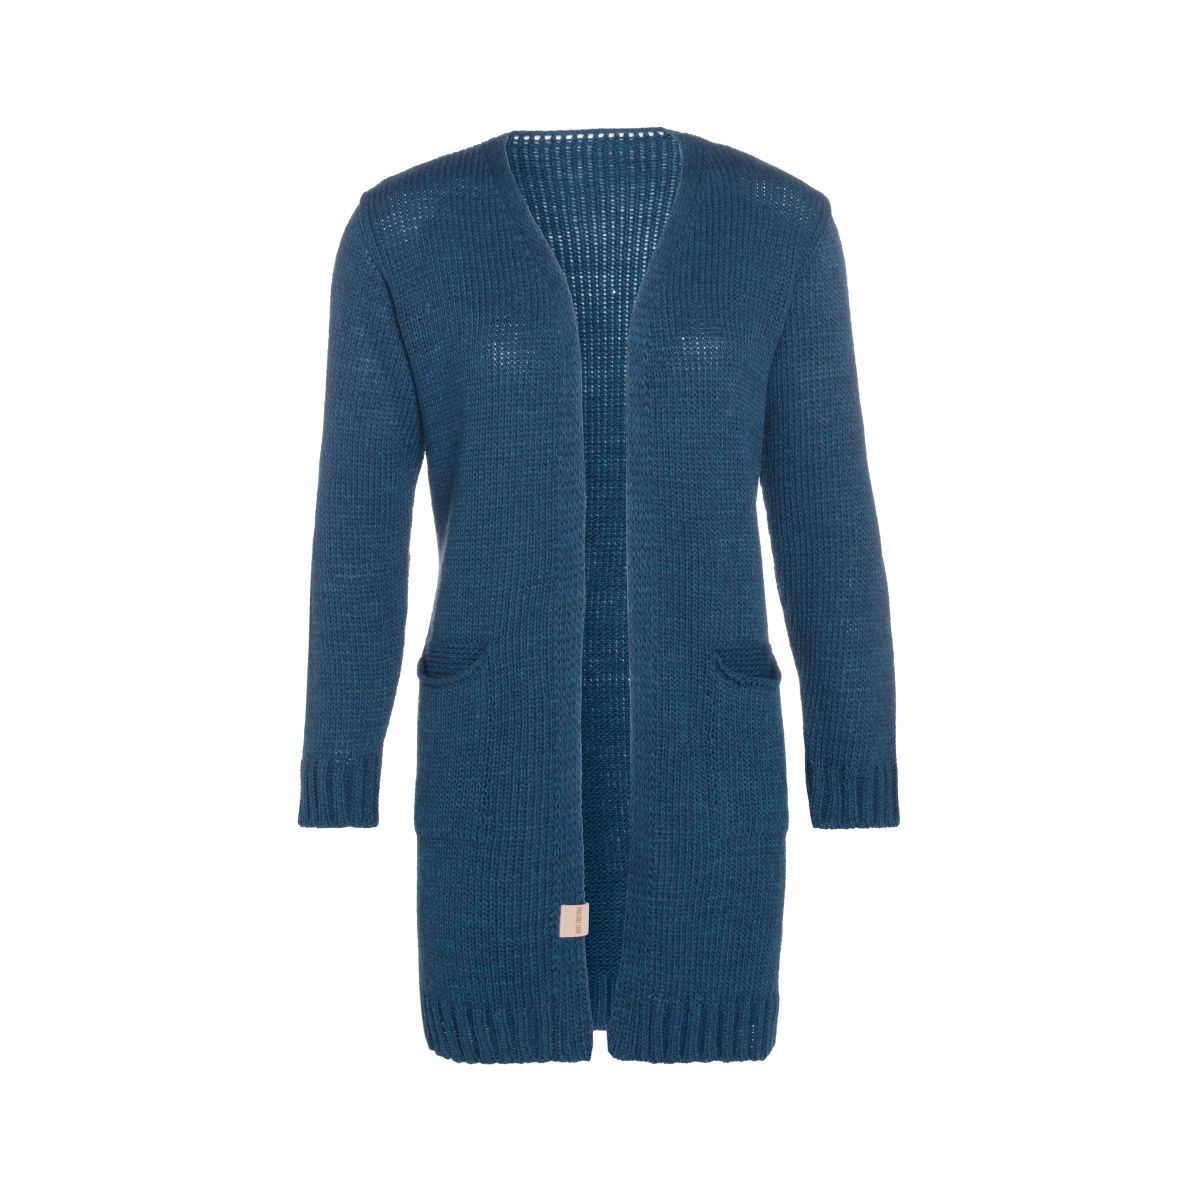 ruby knitted cardigan petrol 4042 with side pockets